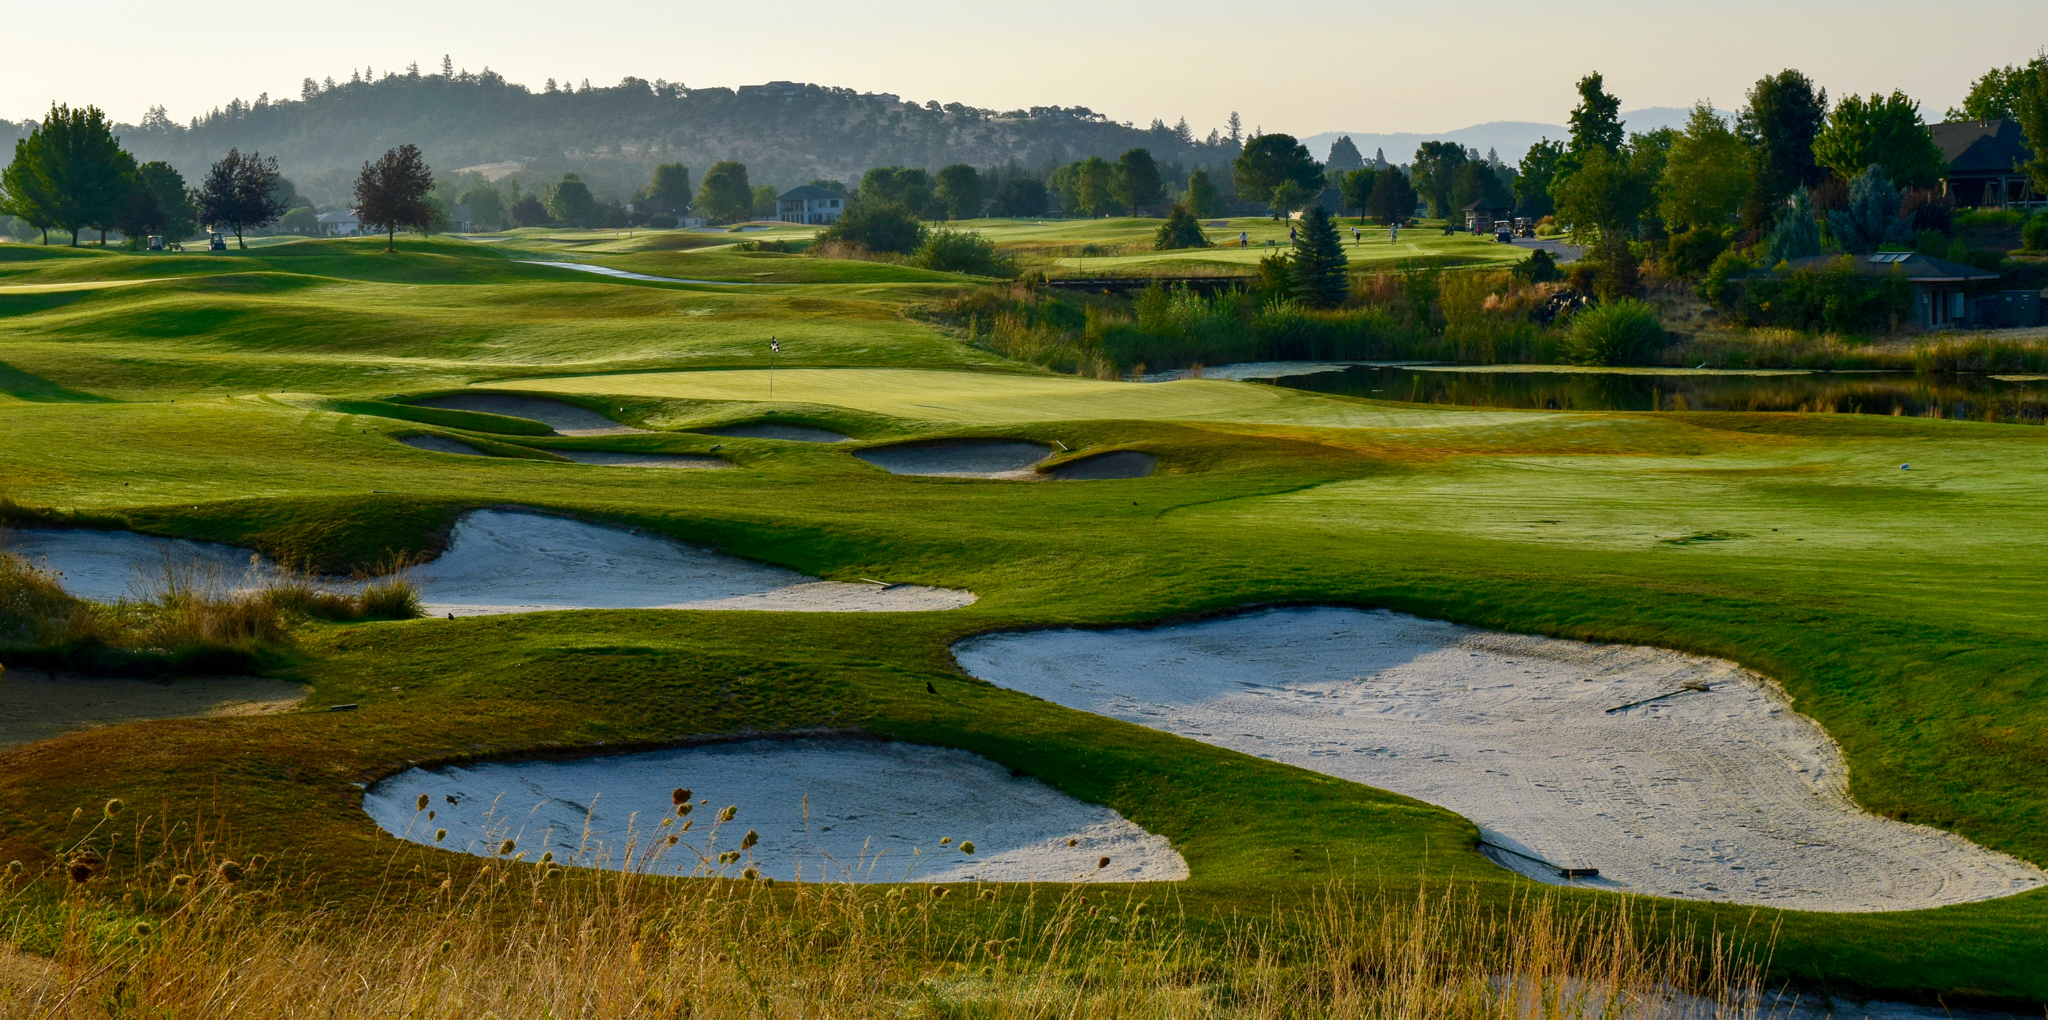 The Resort at Eagle Point: A golf course becomes a destination